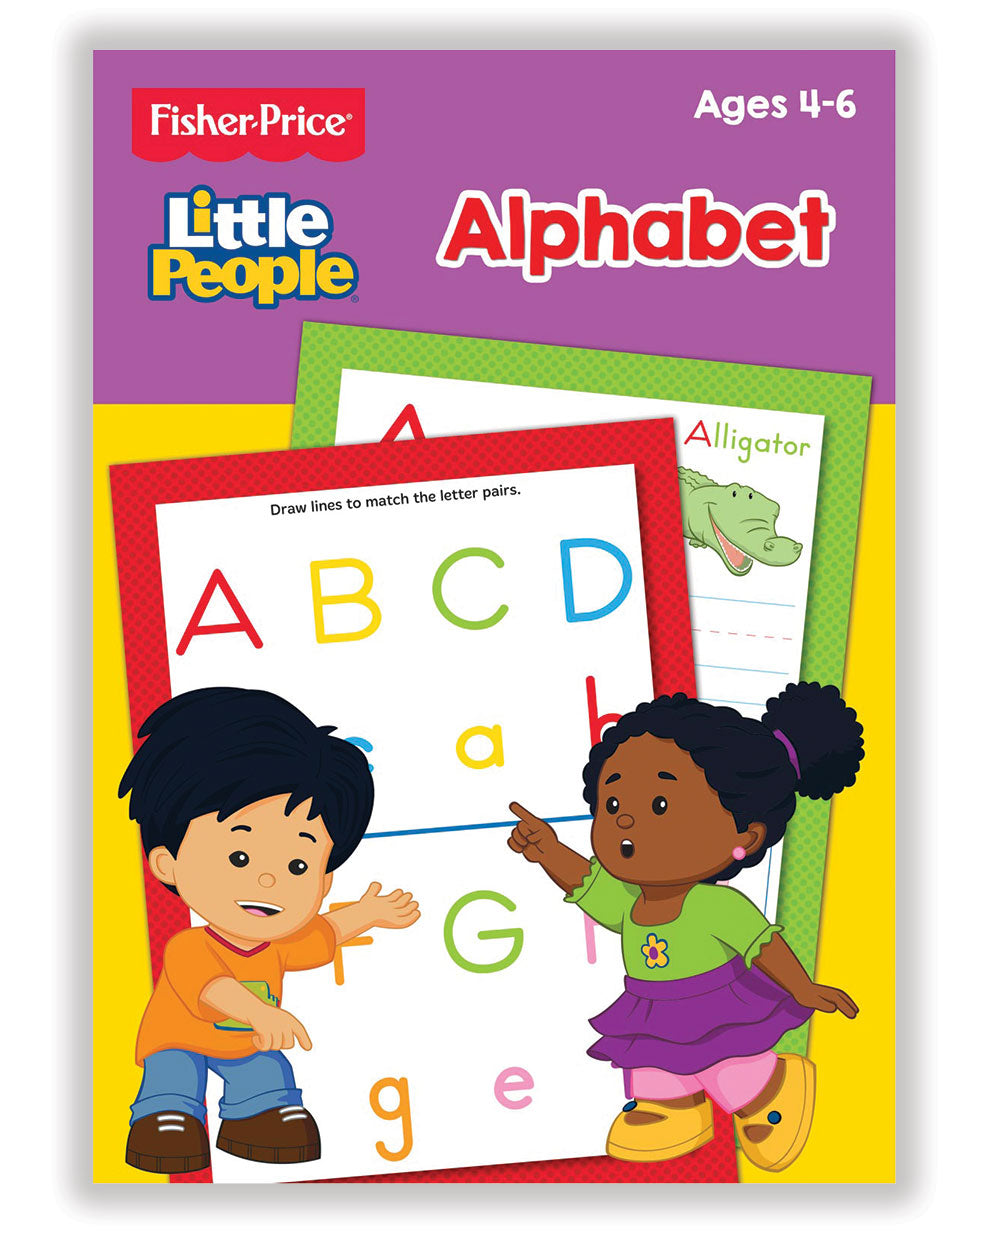 Fisher Price Little People Alphabet book ages 4-6 front cover on a white back ground